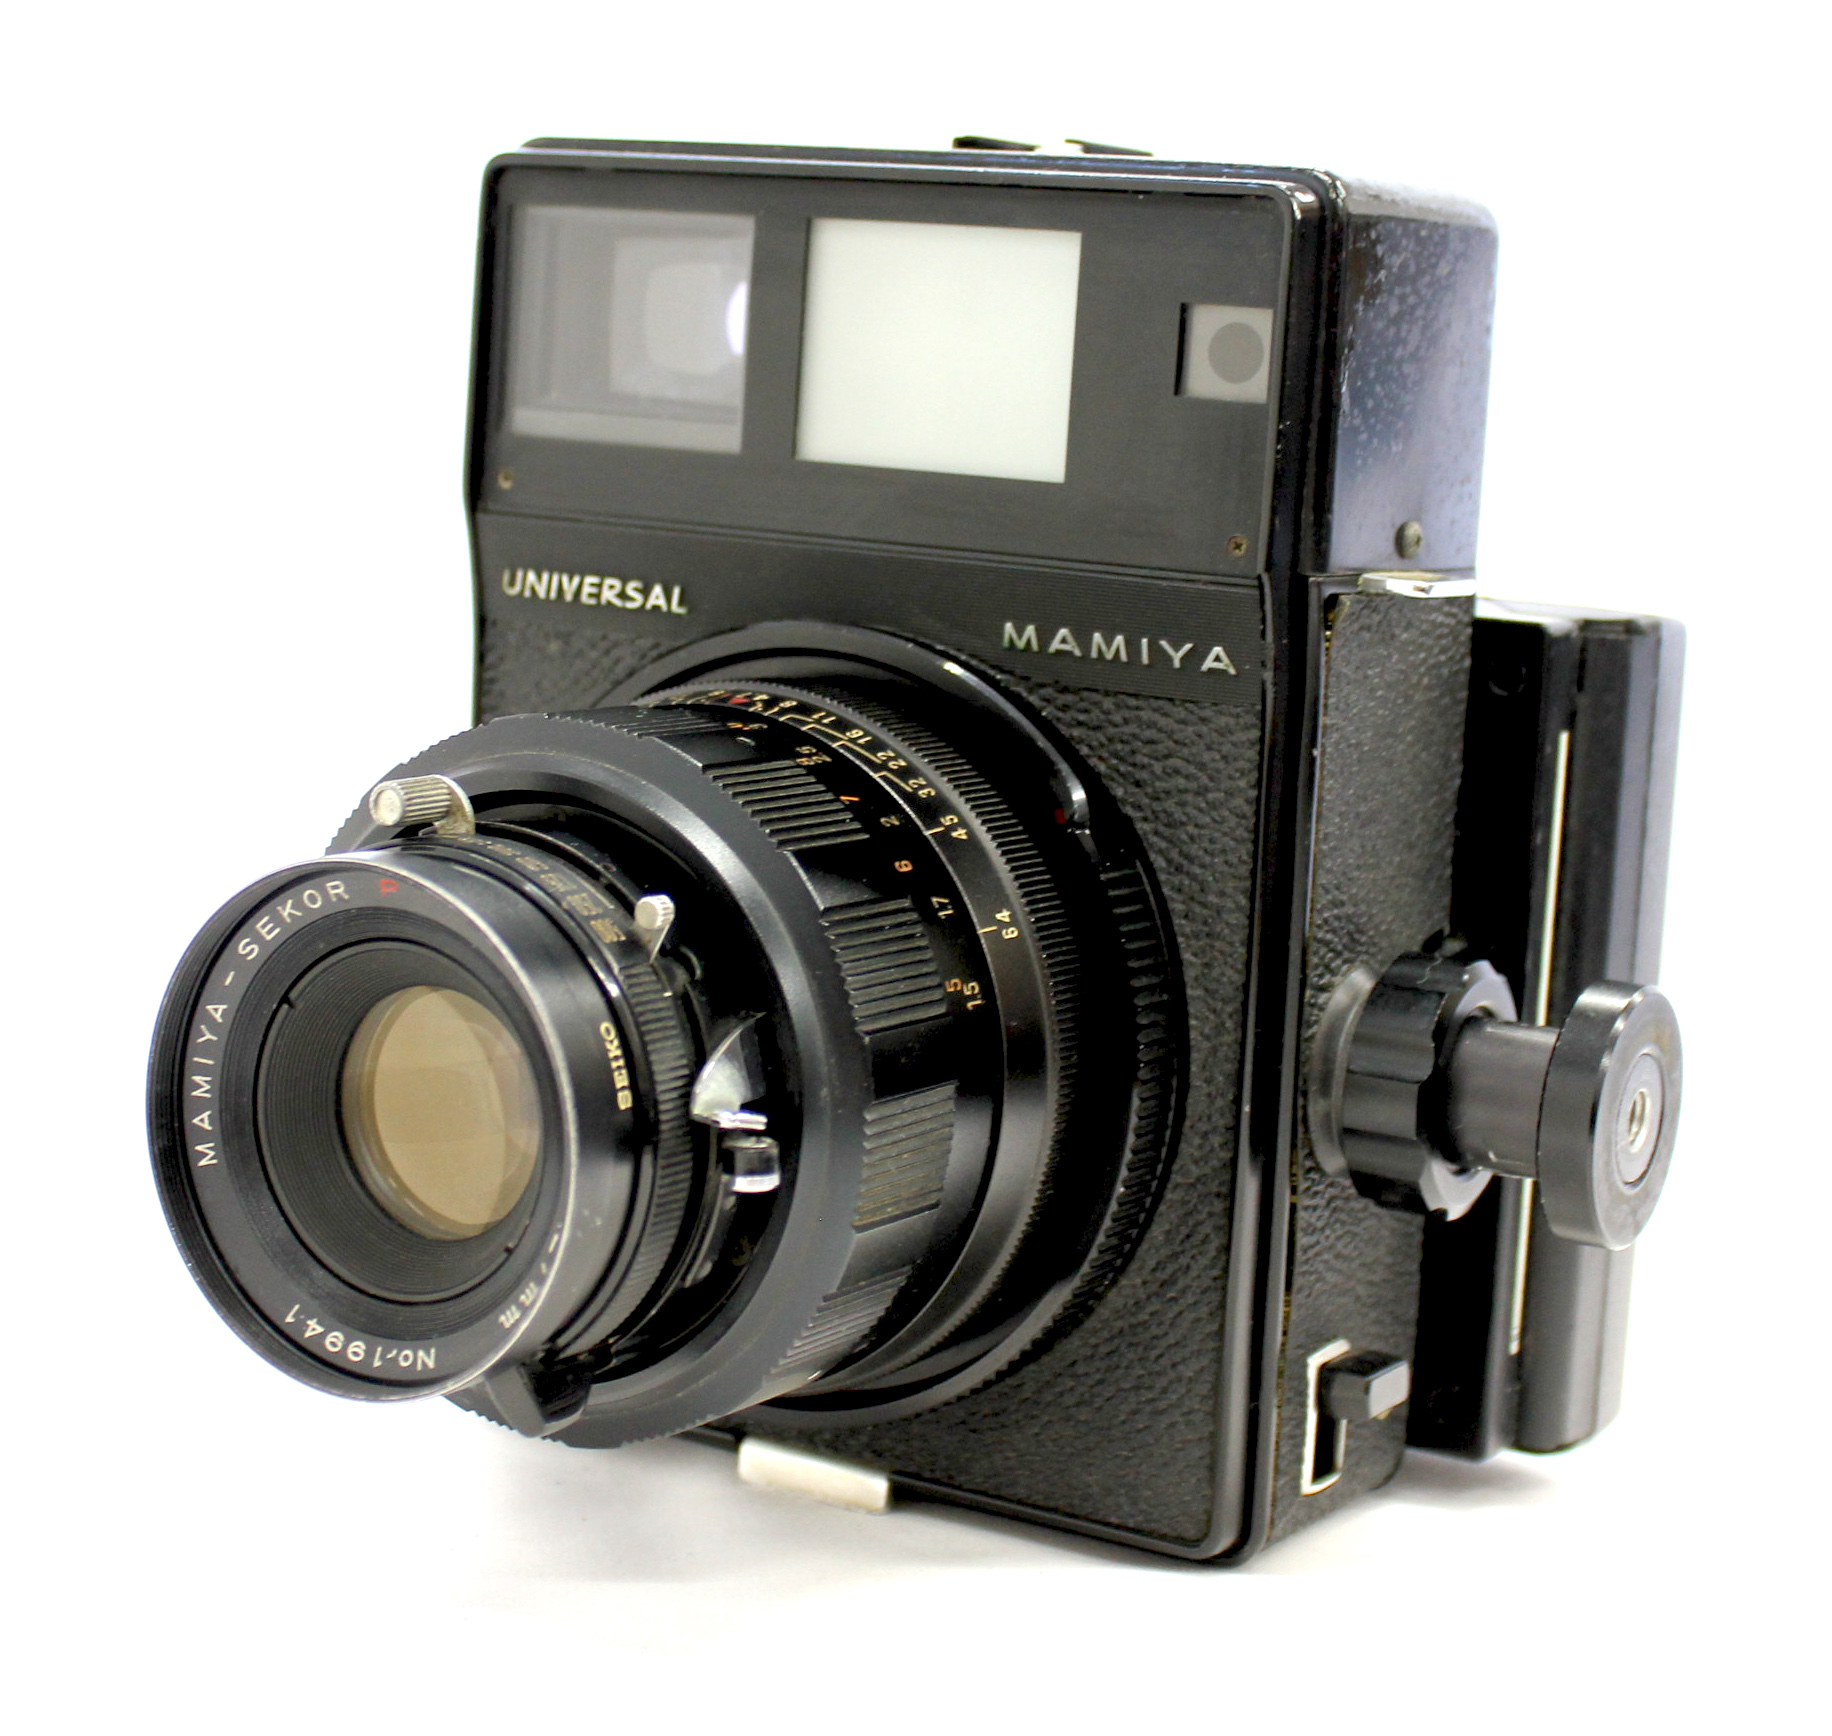 [Exc++] Mamiya Universal Press with Sekor P 127mm F/4.7 Lens & Polaroid Back from Japan